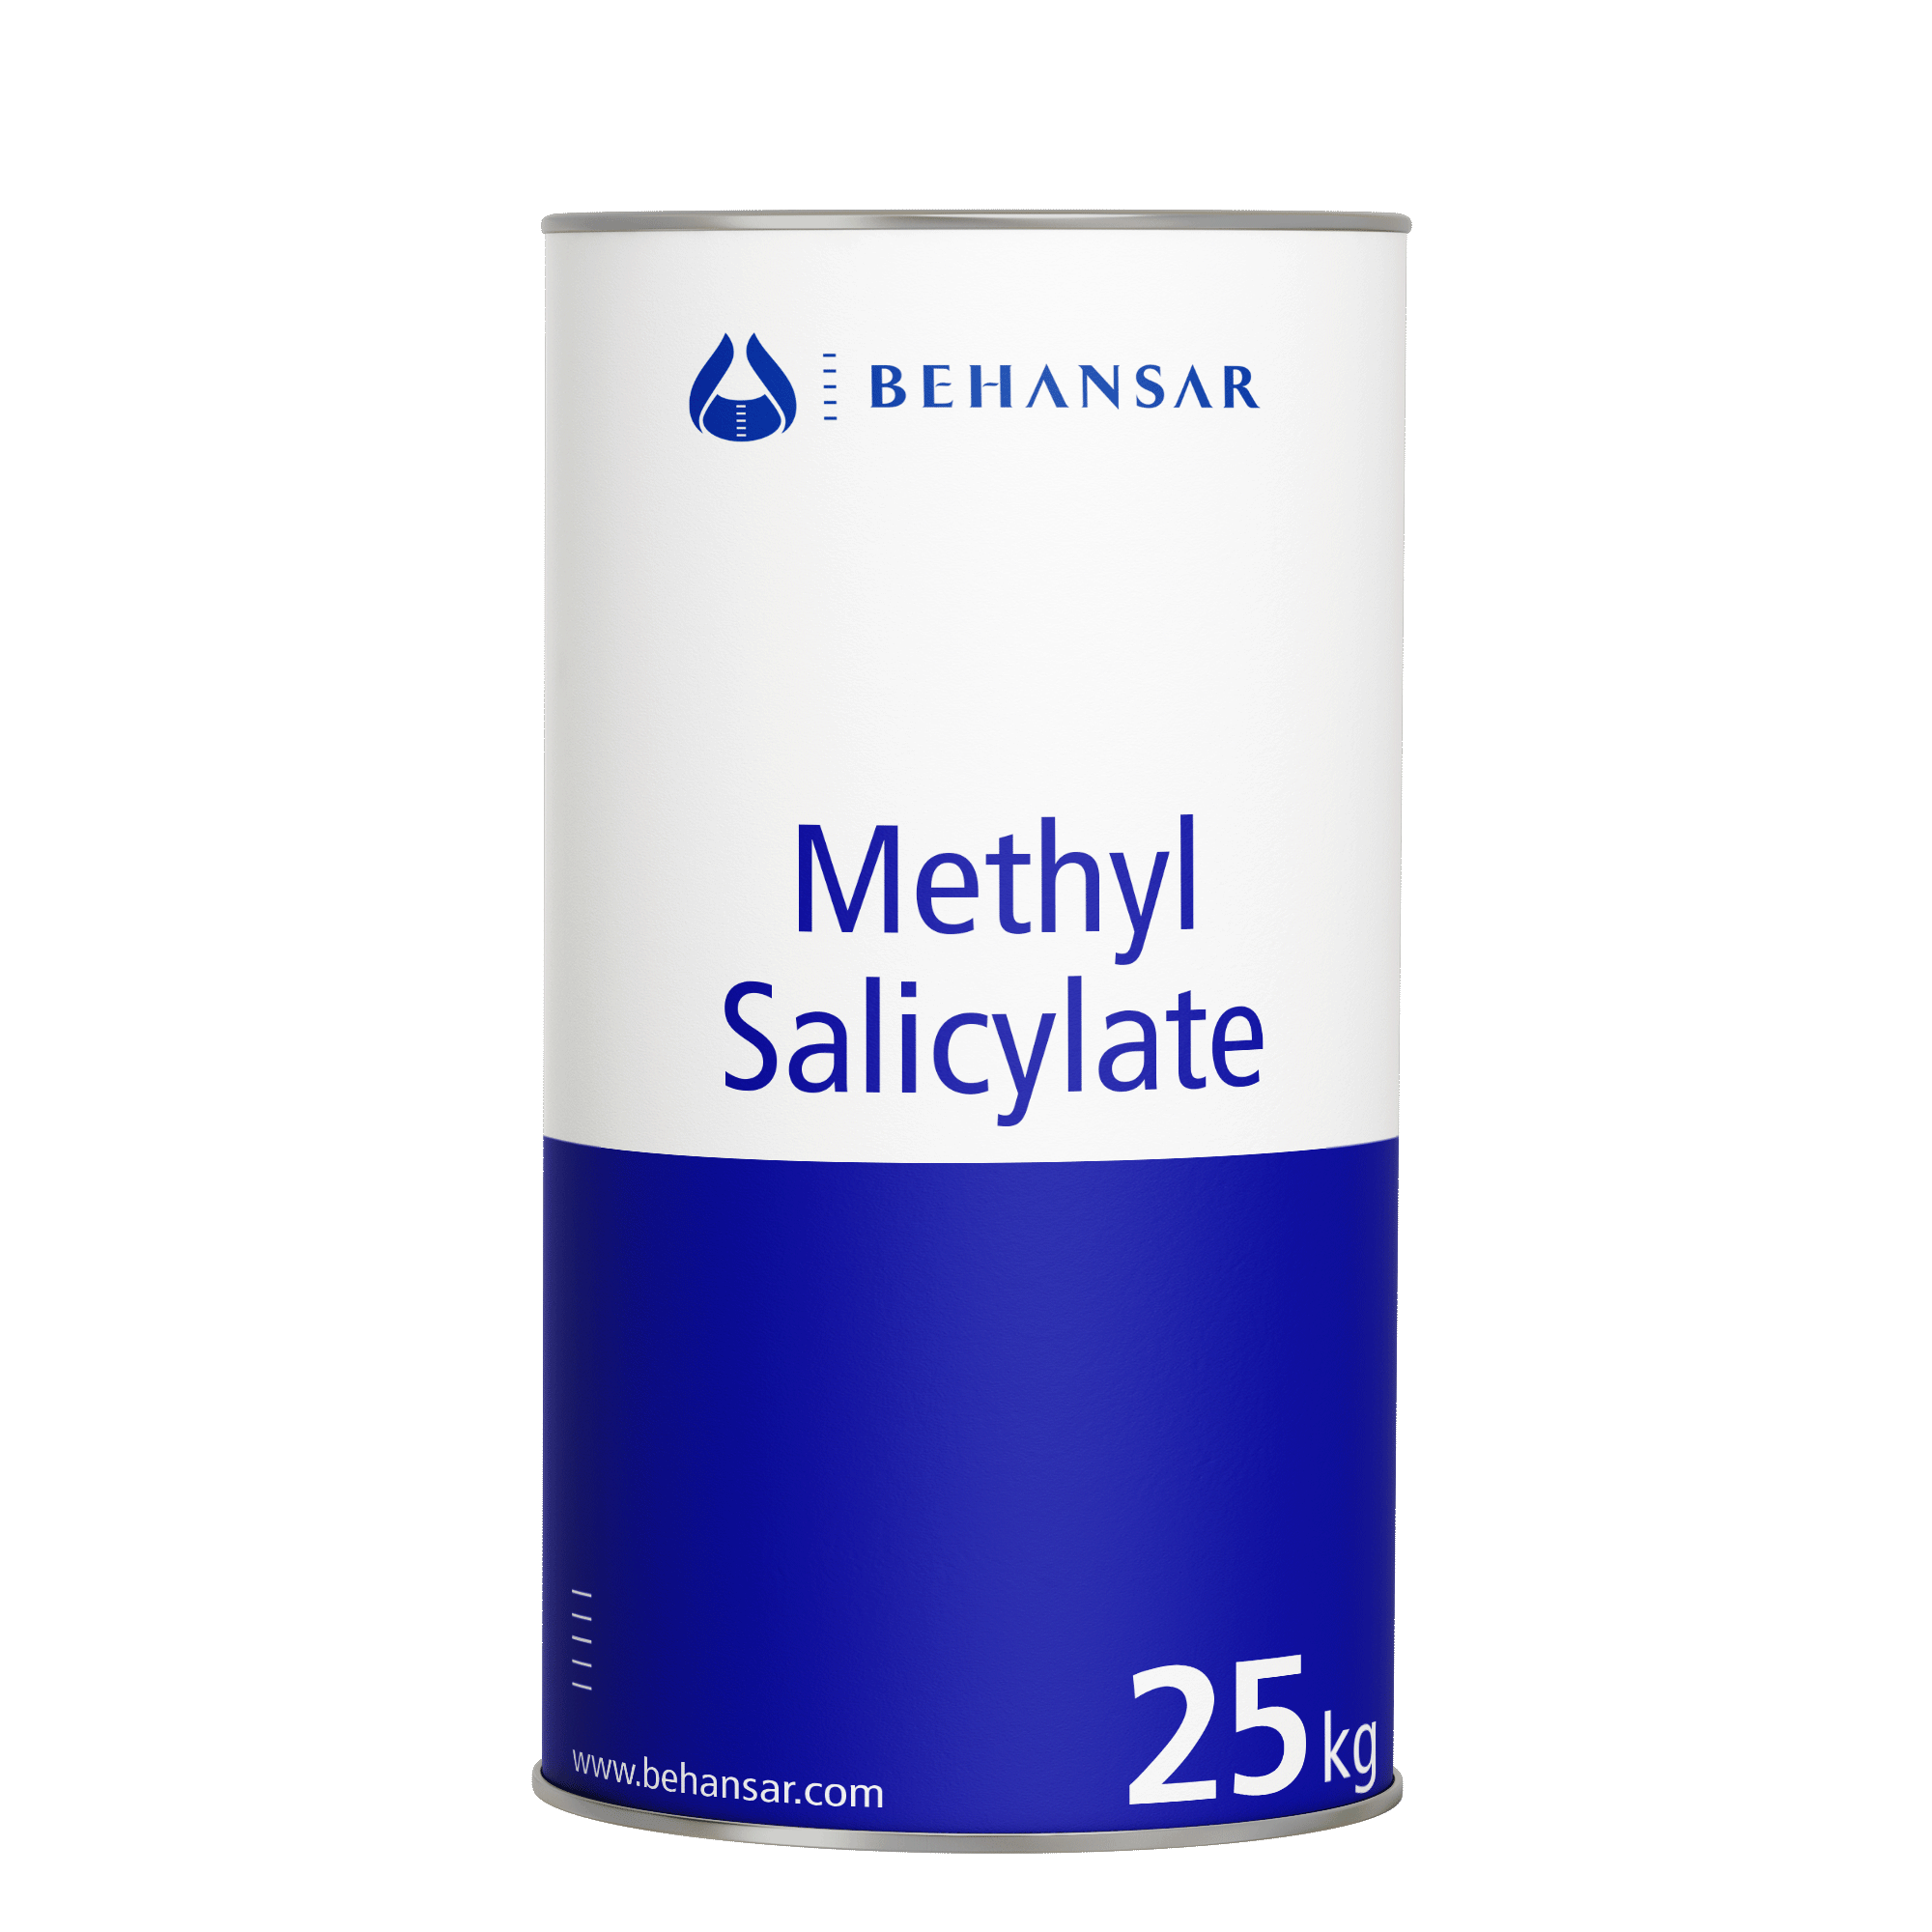 Methyl Salicylate is one of the products of Behansar Co